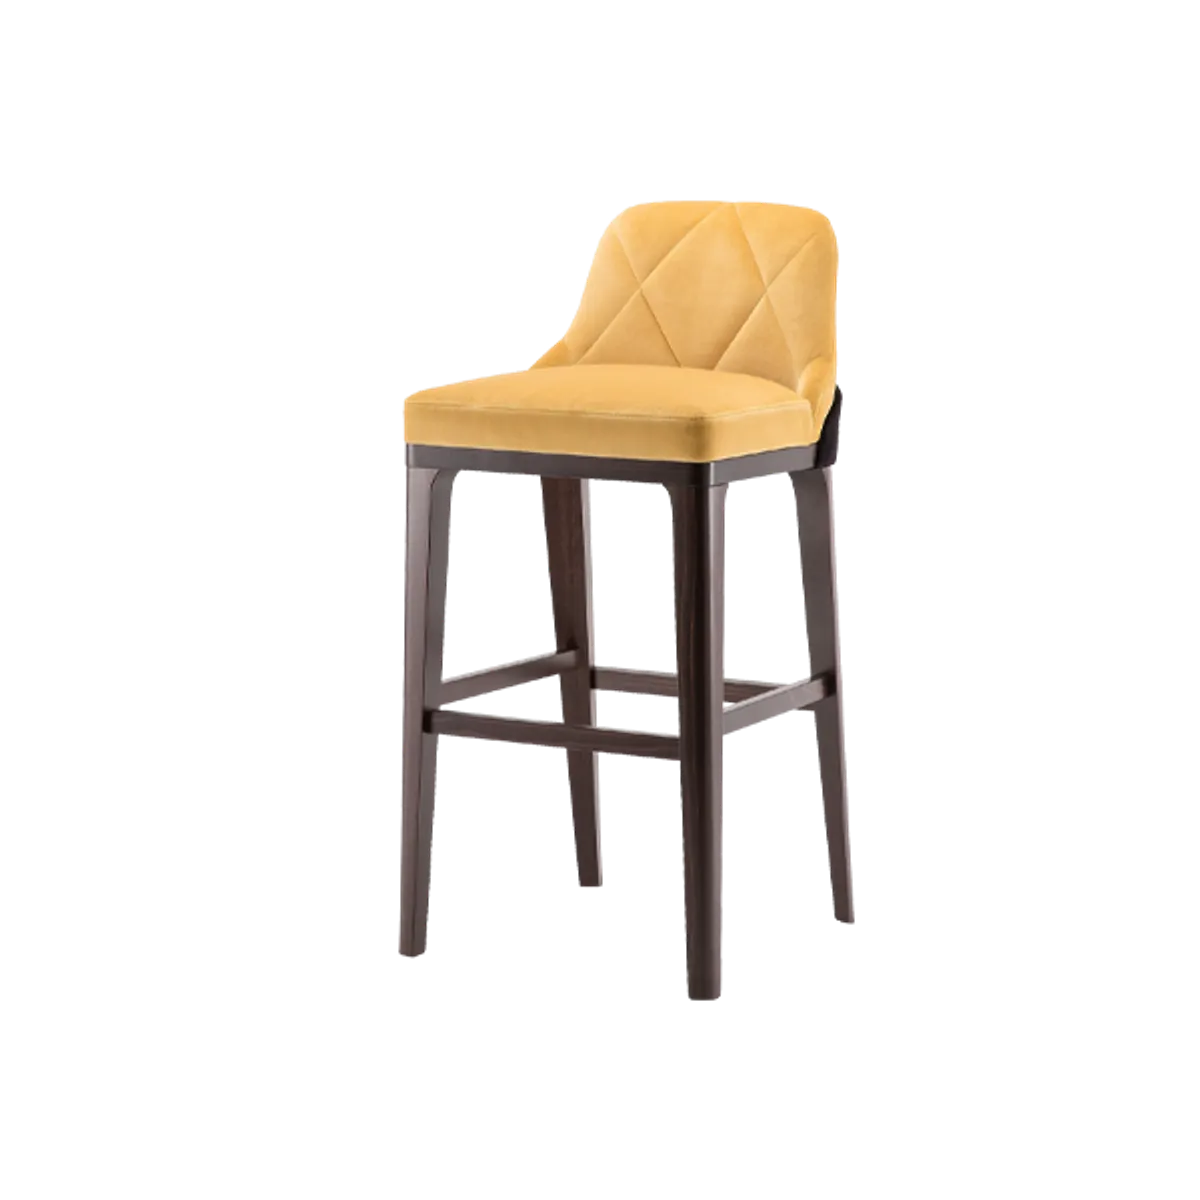 Dodie bar stool Inside Out Contracts